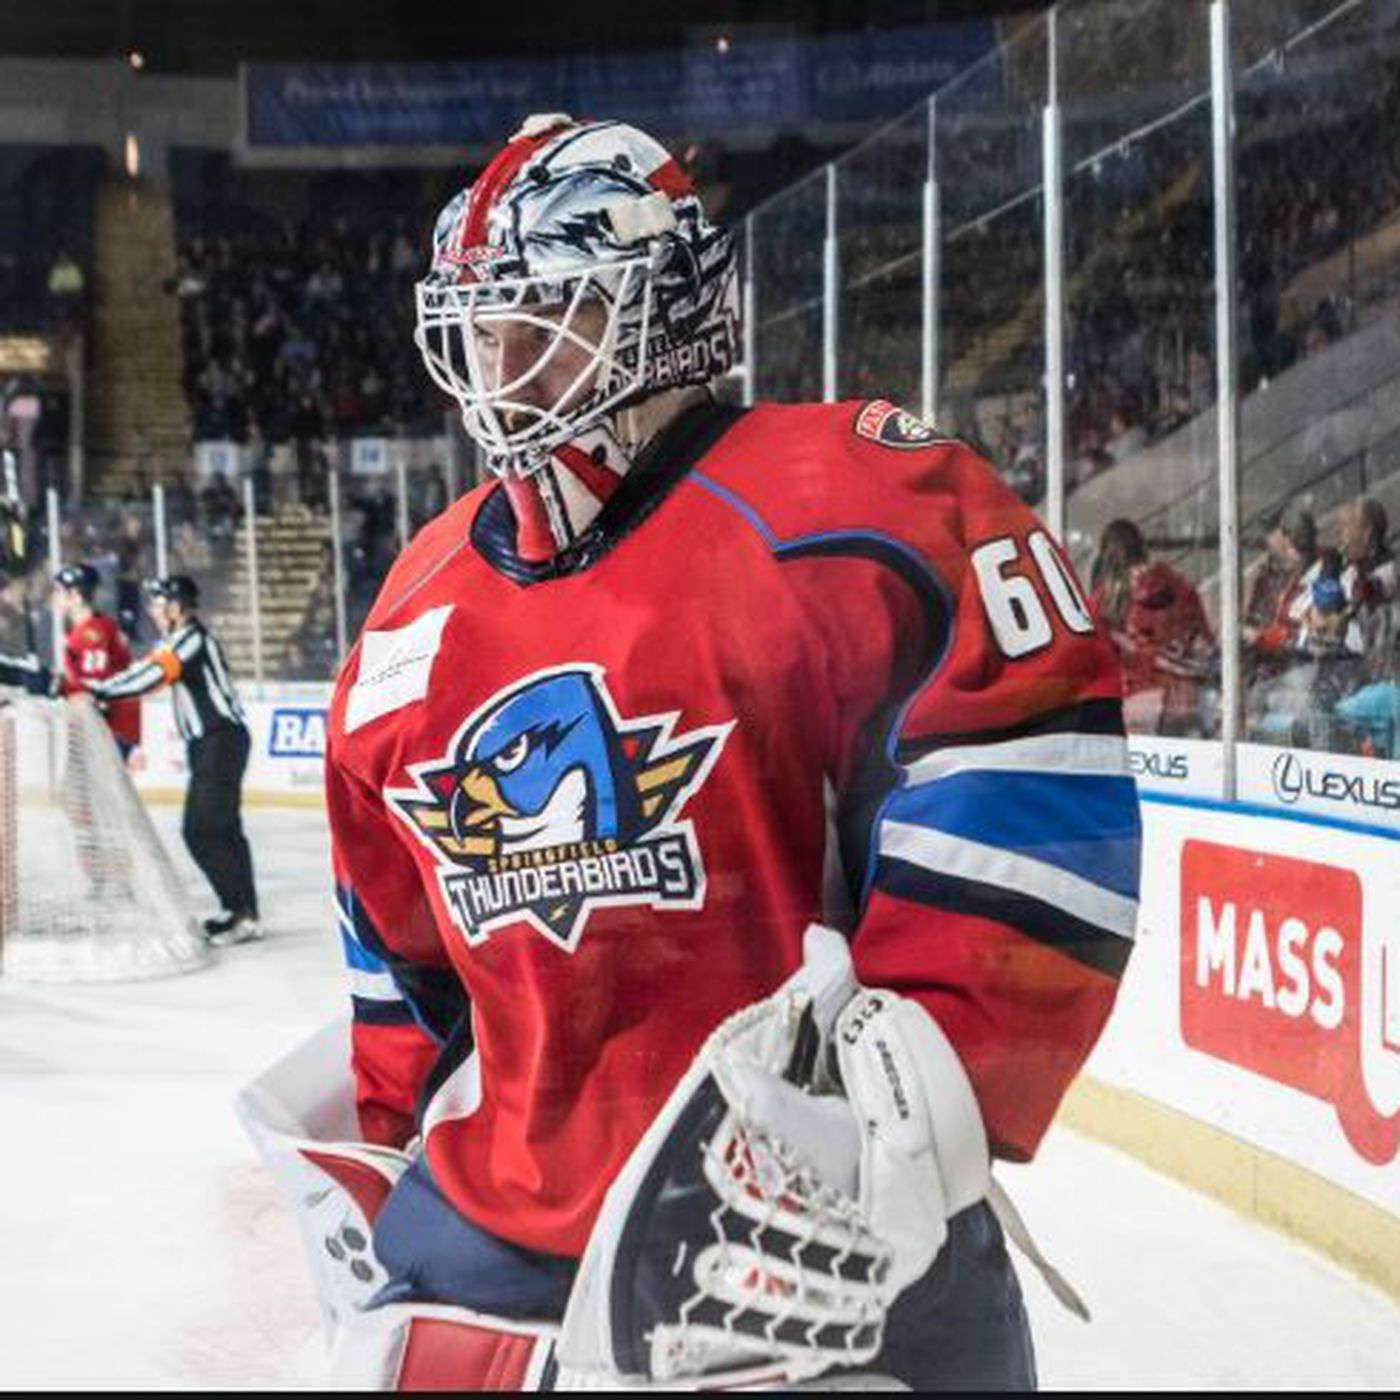 A Look At The 2019 20 Springfield Thunderbirds Roster: Goaltenders